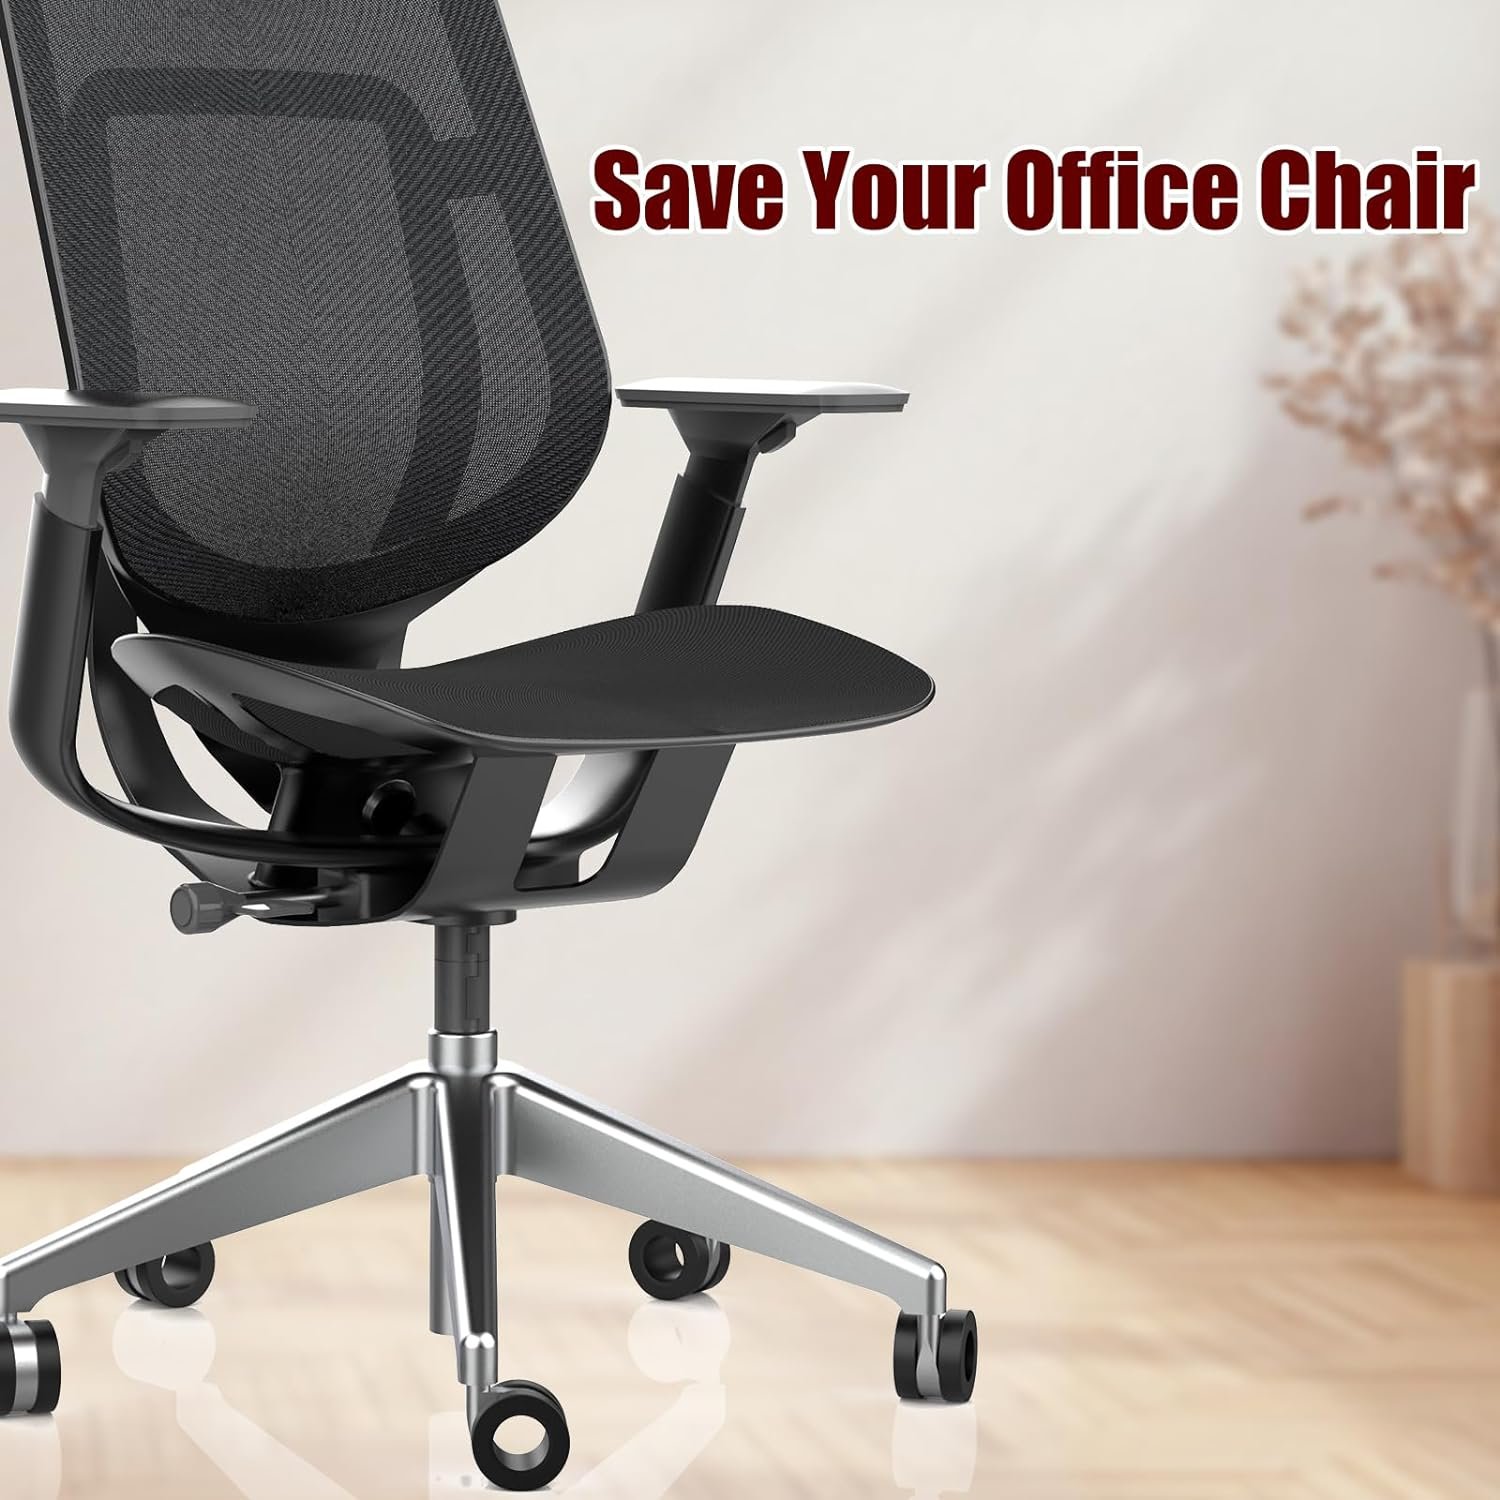 ARSUNOVO Office Chair Clamp Review